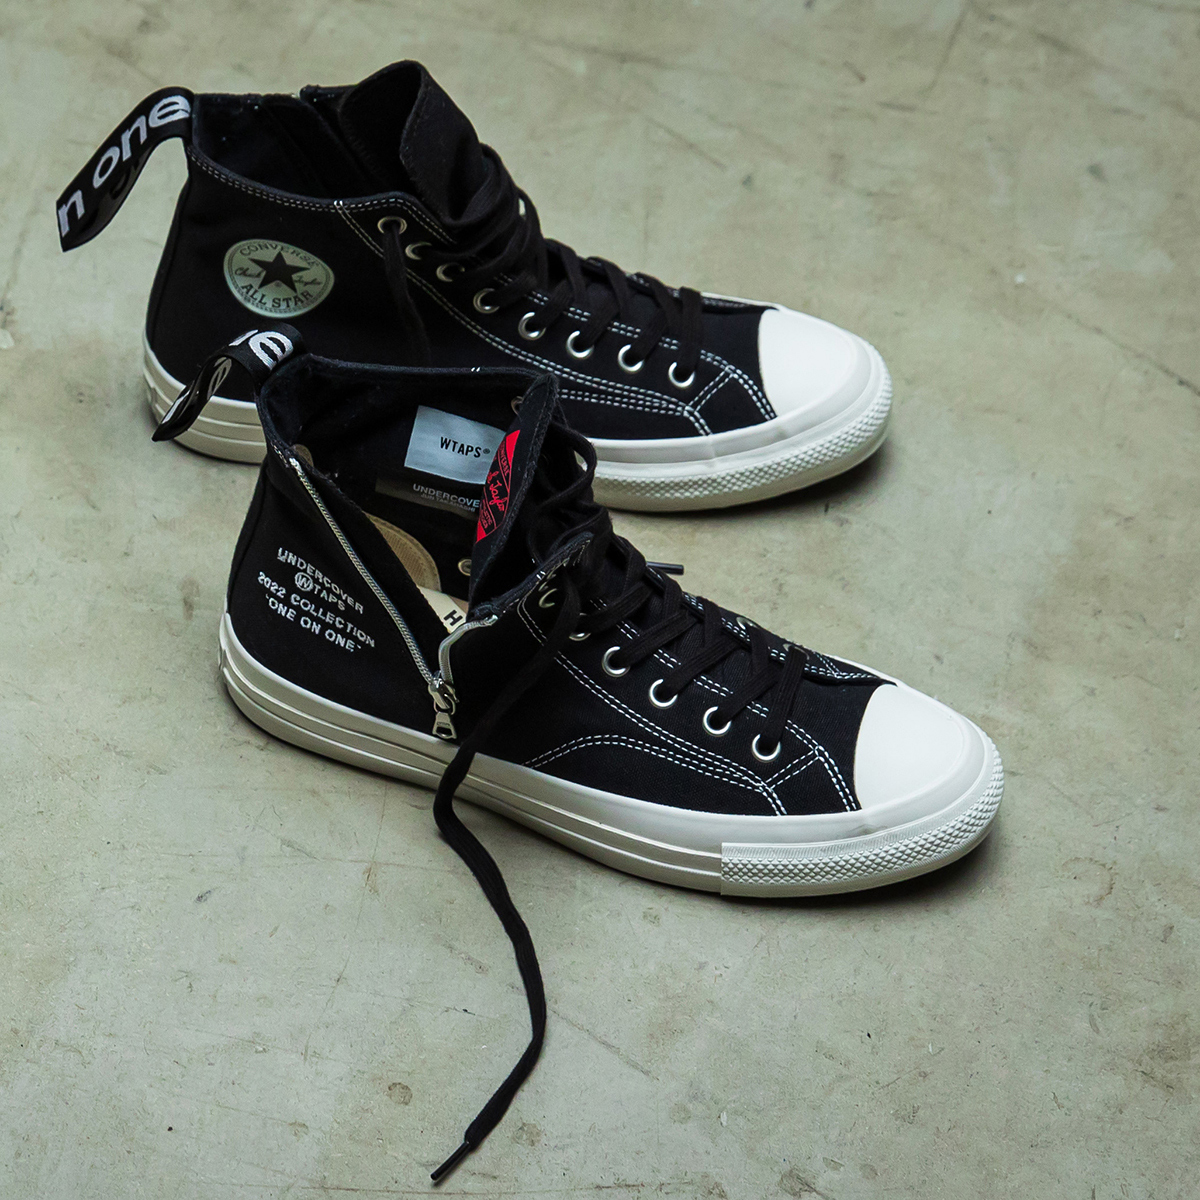 UNDERCOVER x WTAPS x Converse Chuck Taylor: Release Date, Price